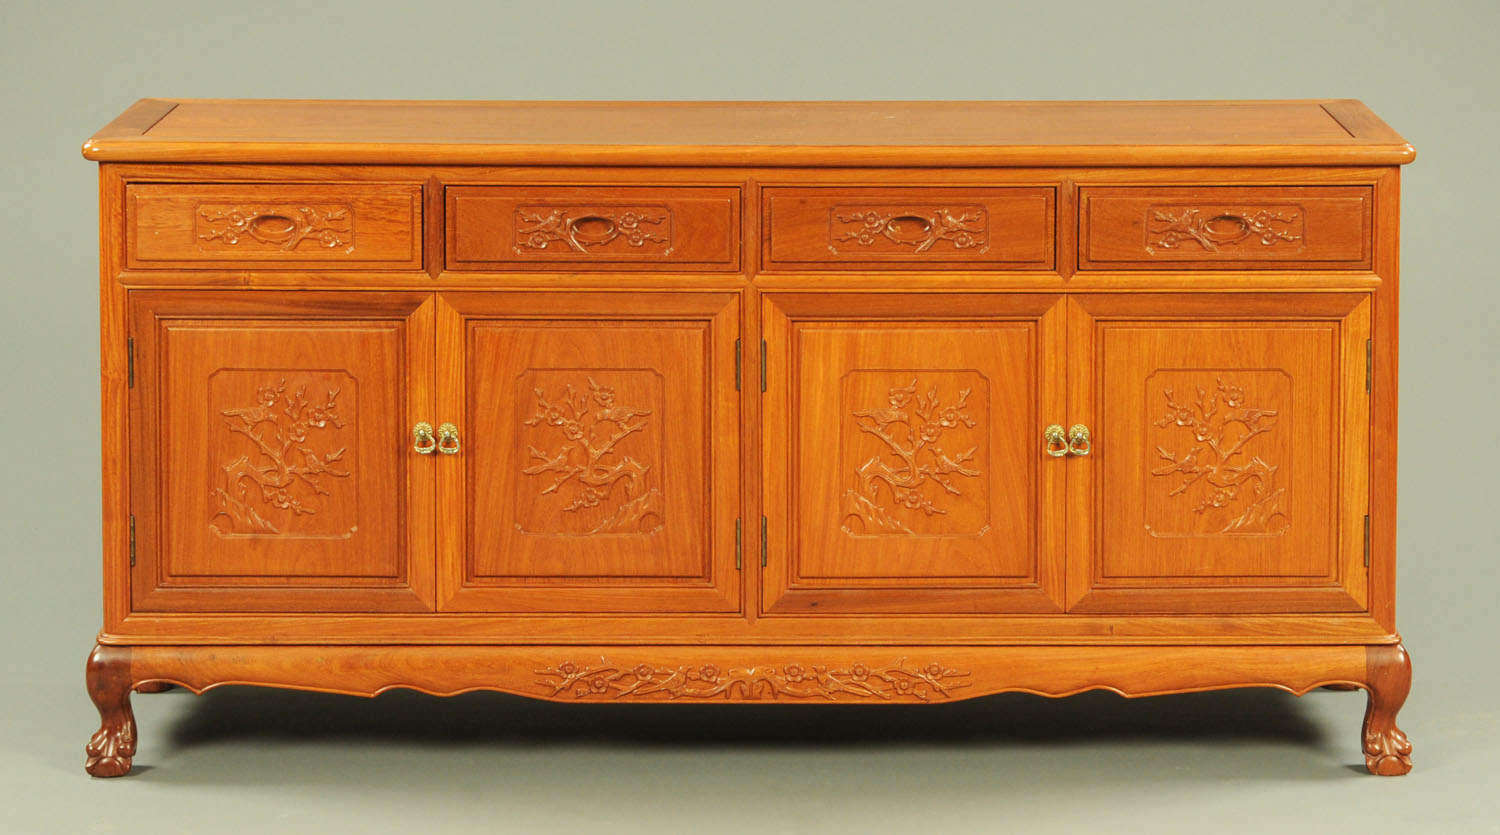 A Chinese rosewood dining room suite, each piece decorated with relief carved flowers, - Image 2 of 4